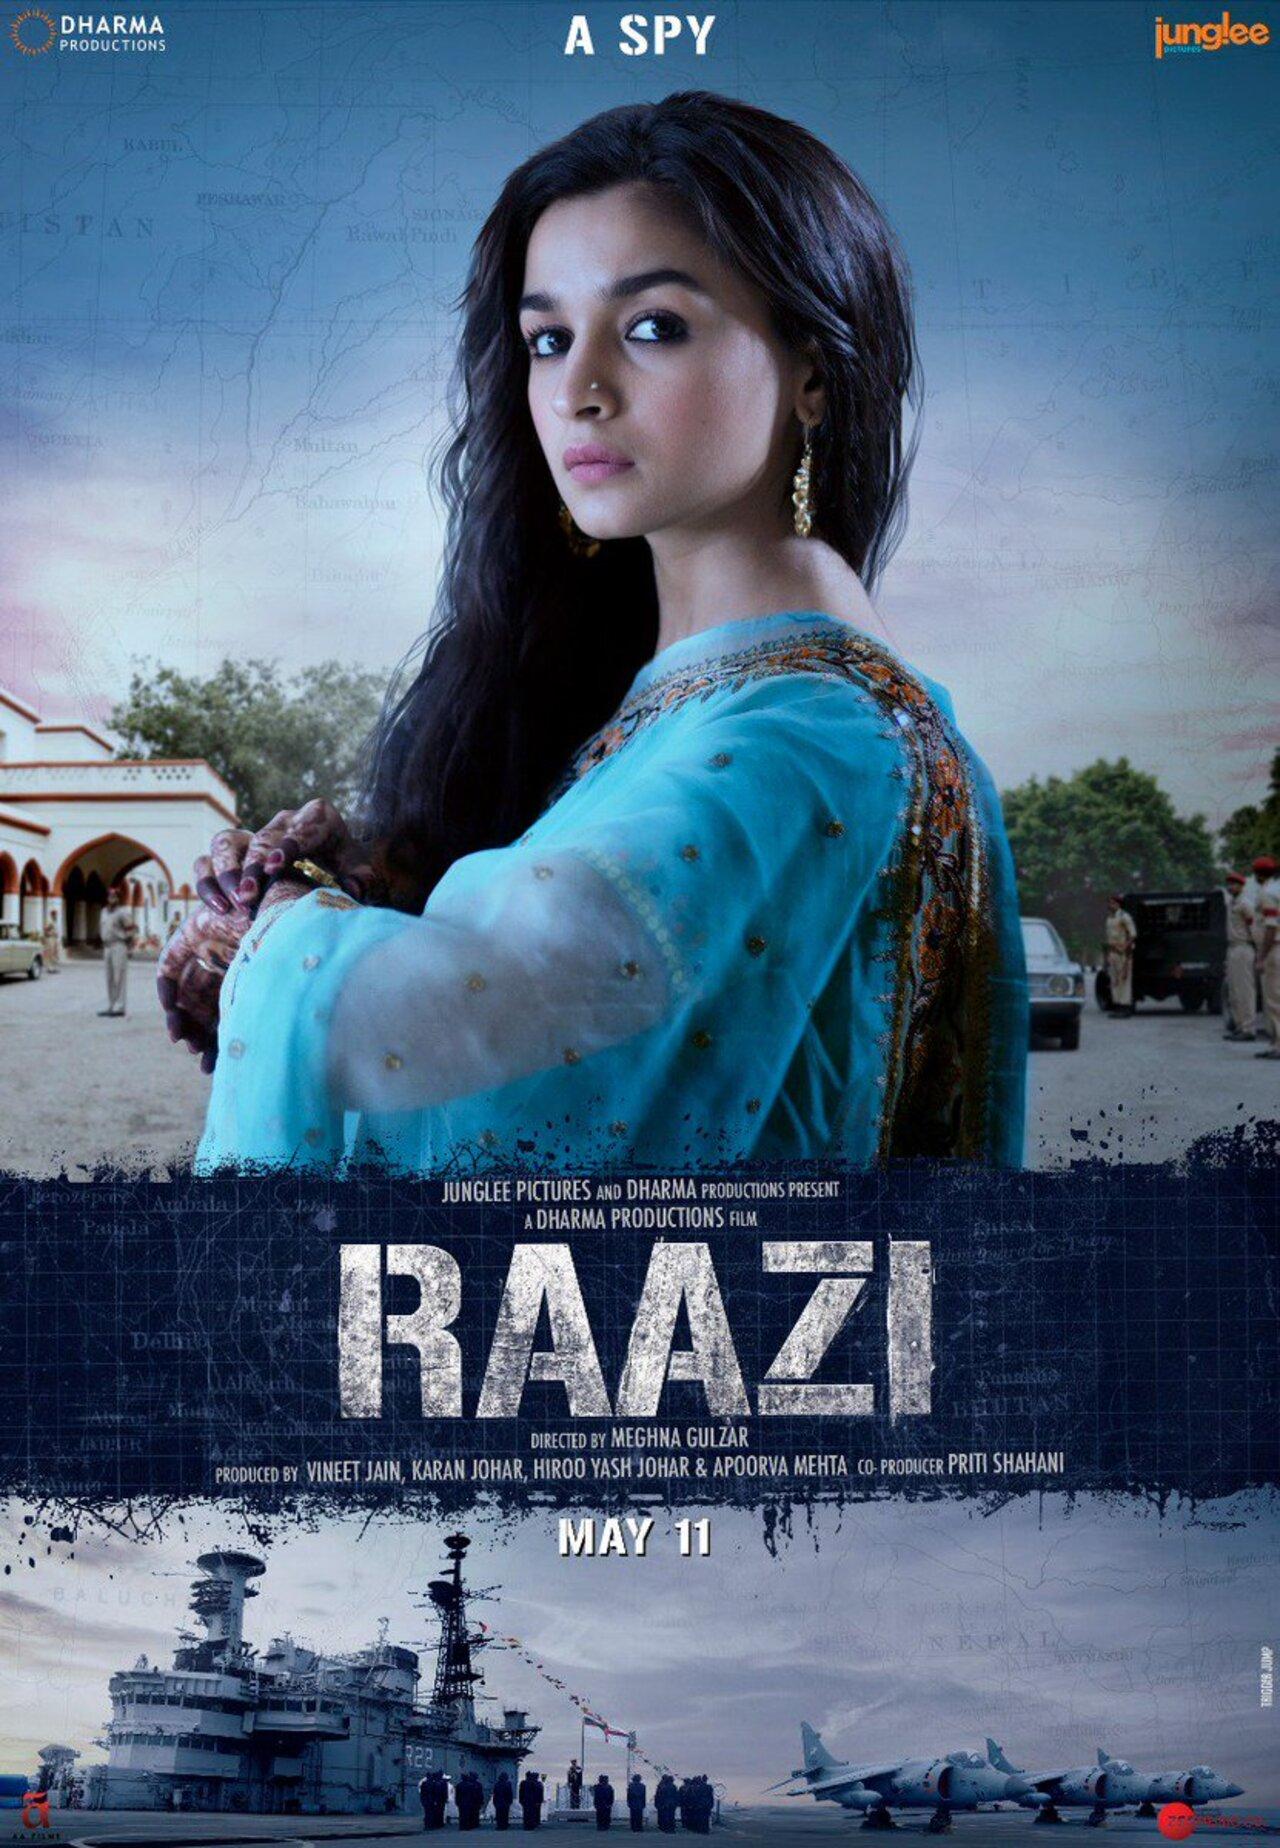 'Raazi' is based on Harinder Singh Sikka’s novel ‘Calling Sehmat.’ Starring Alia Bhatt in a pivotal role, the film is about Sehmat Khan, a young woman who married a Pakistani military officer to serve as an undercover spy for the Indian intelligence agency